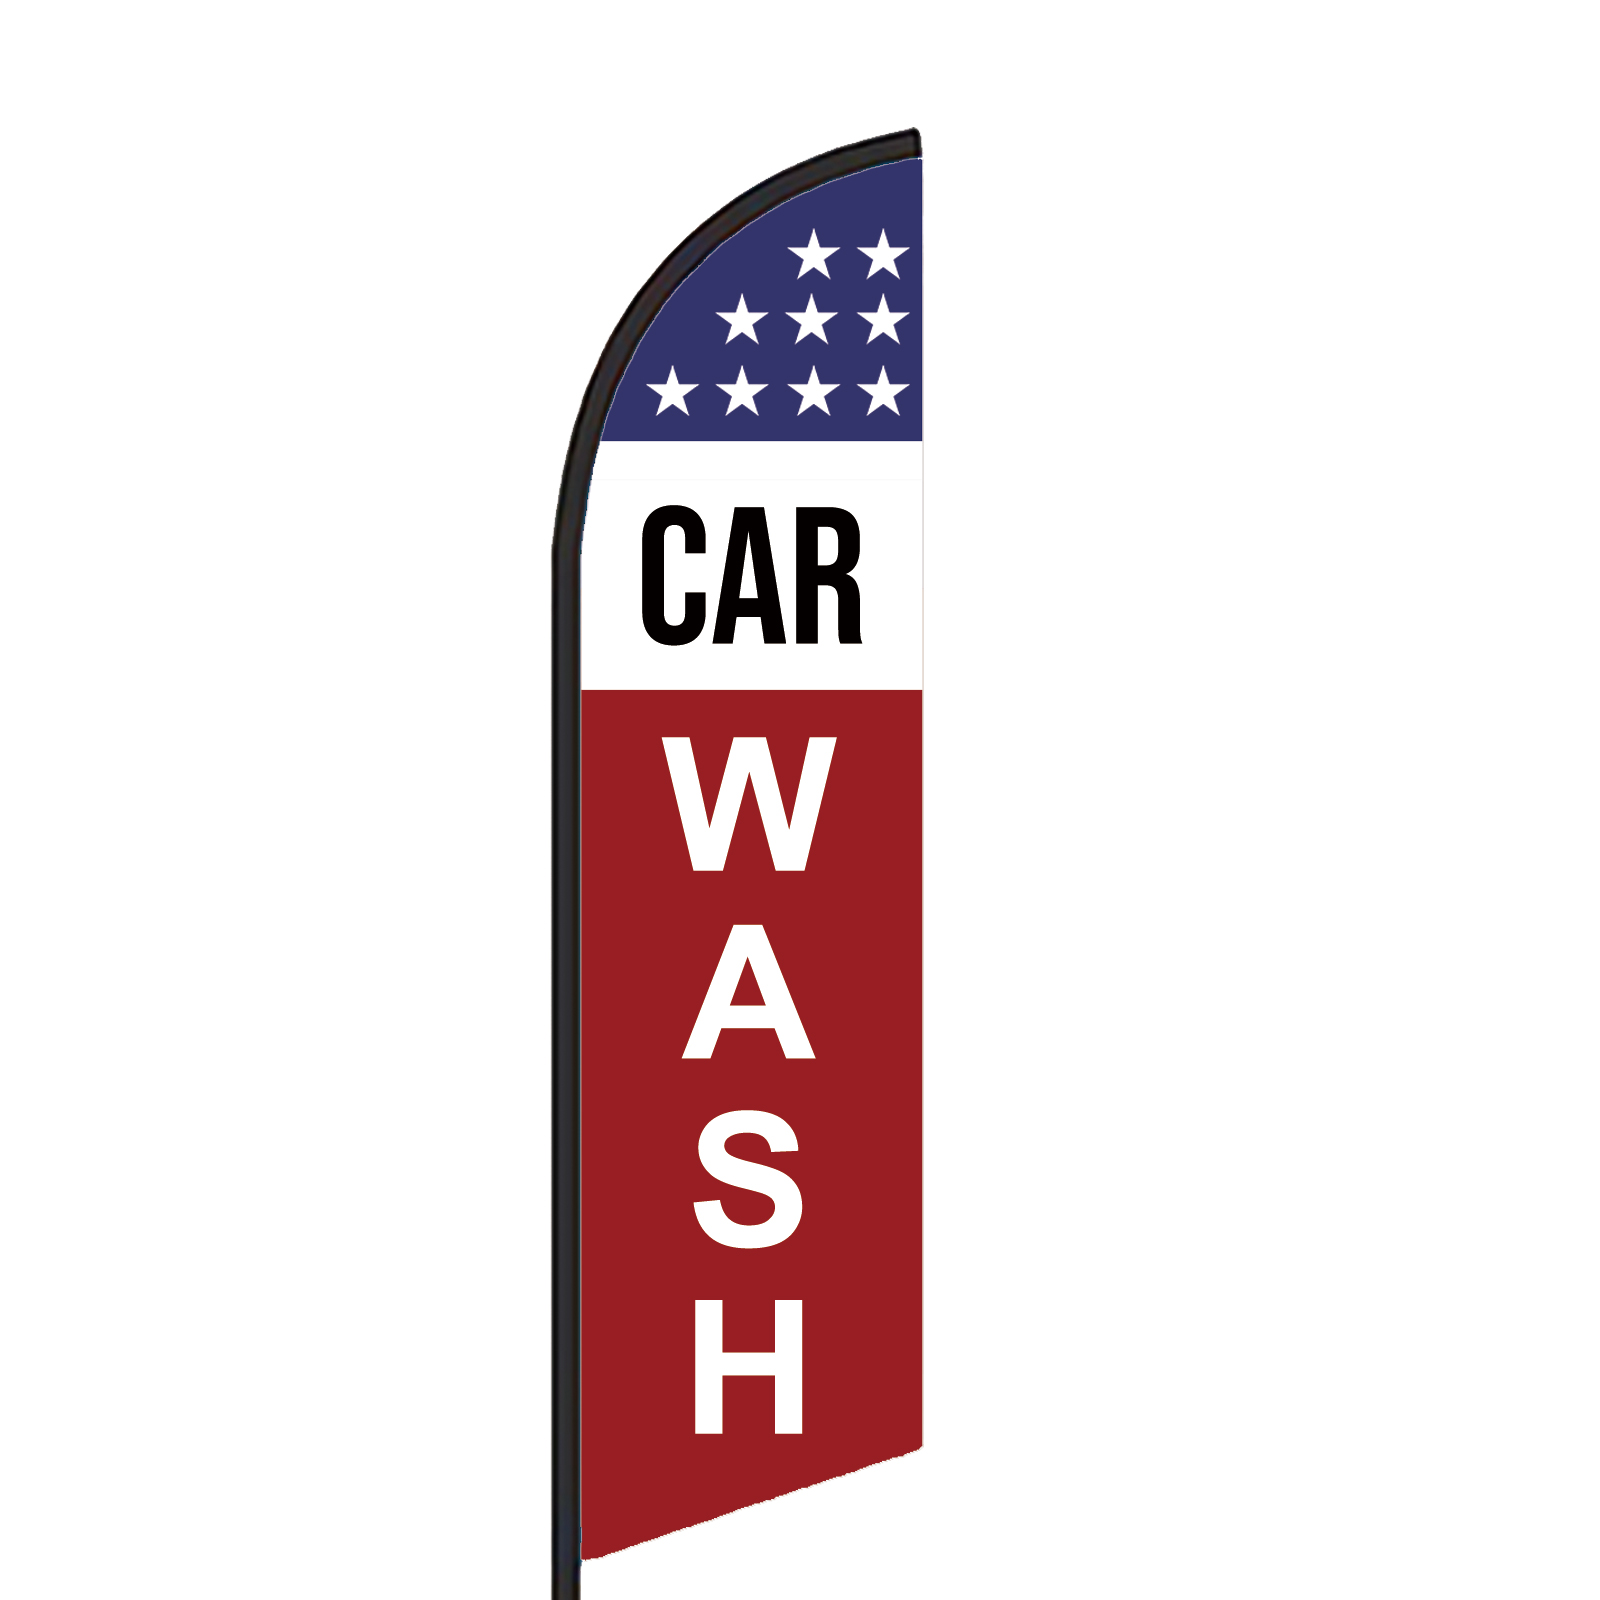 CAR WASH Advertising Feather Flags for Business(flag only)